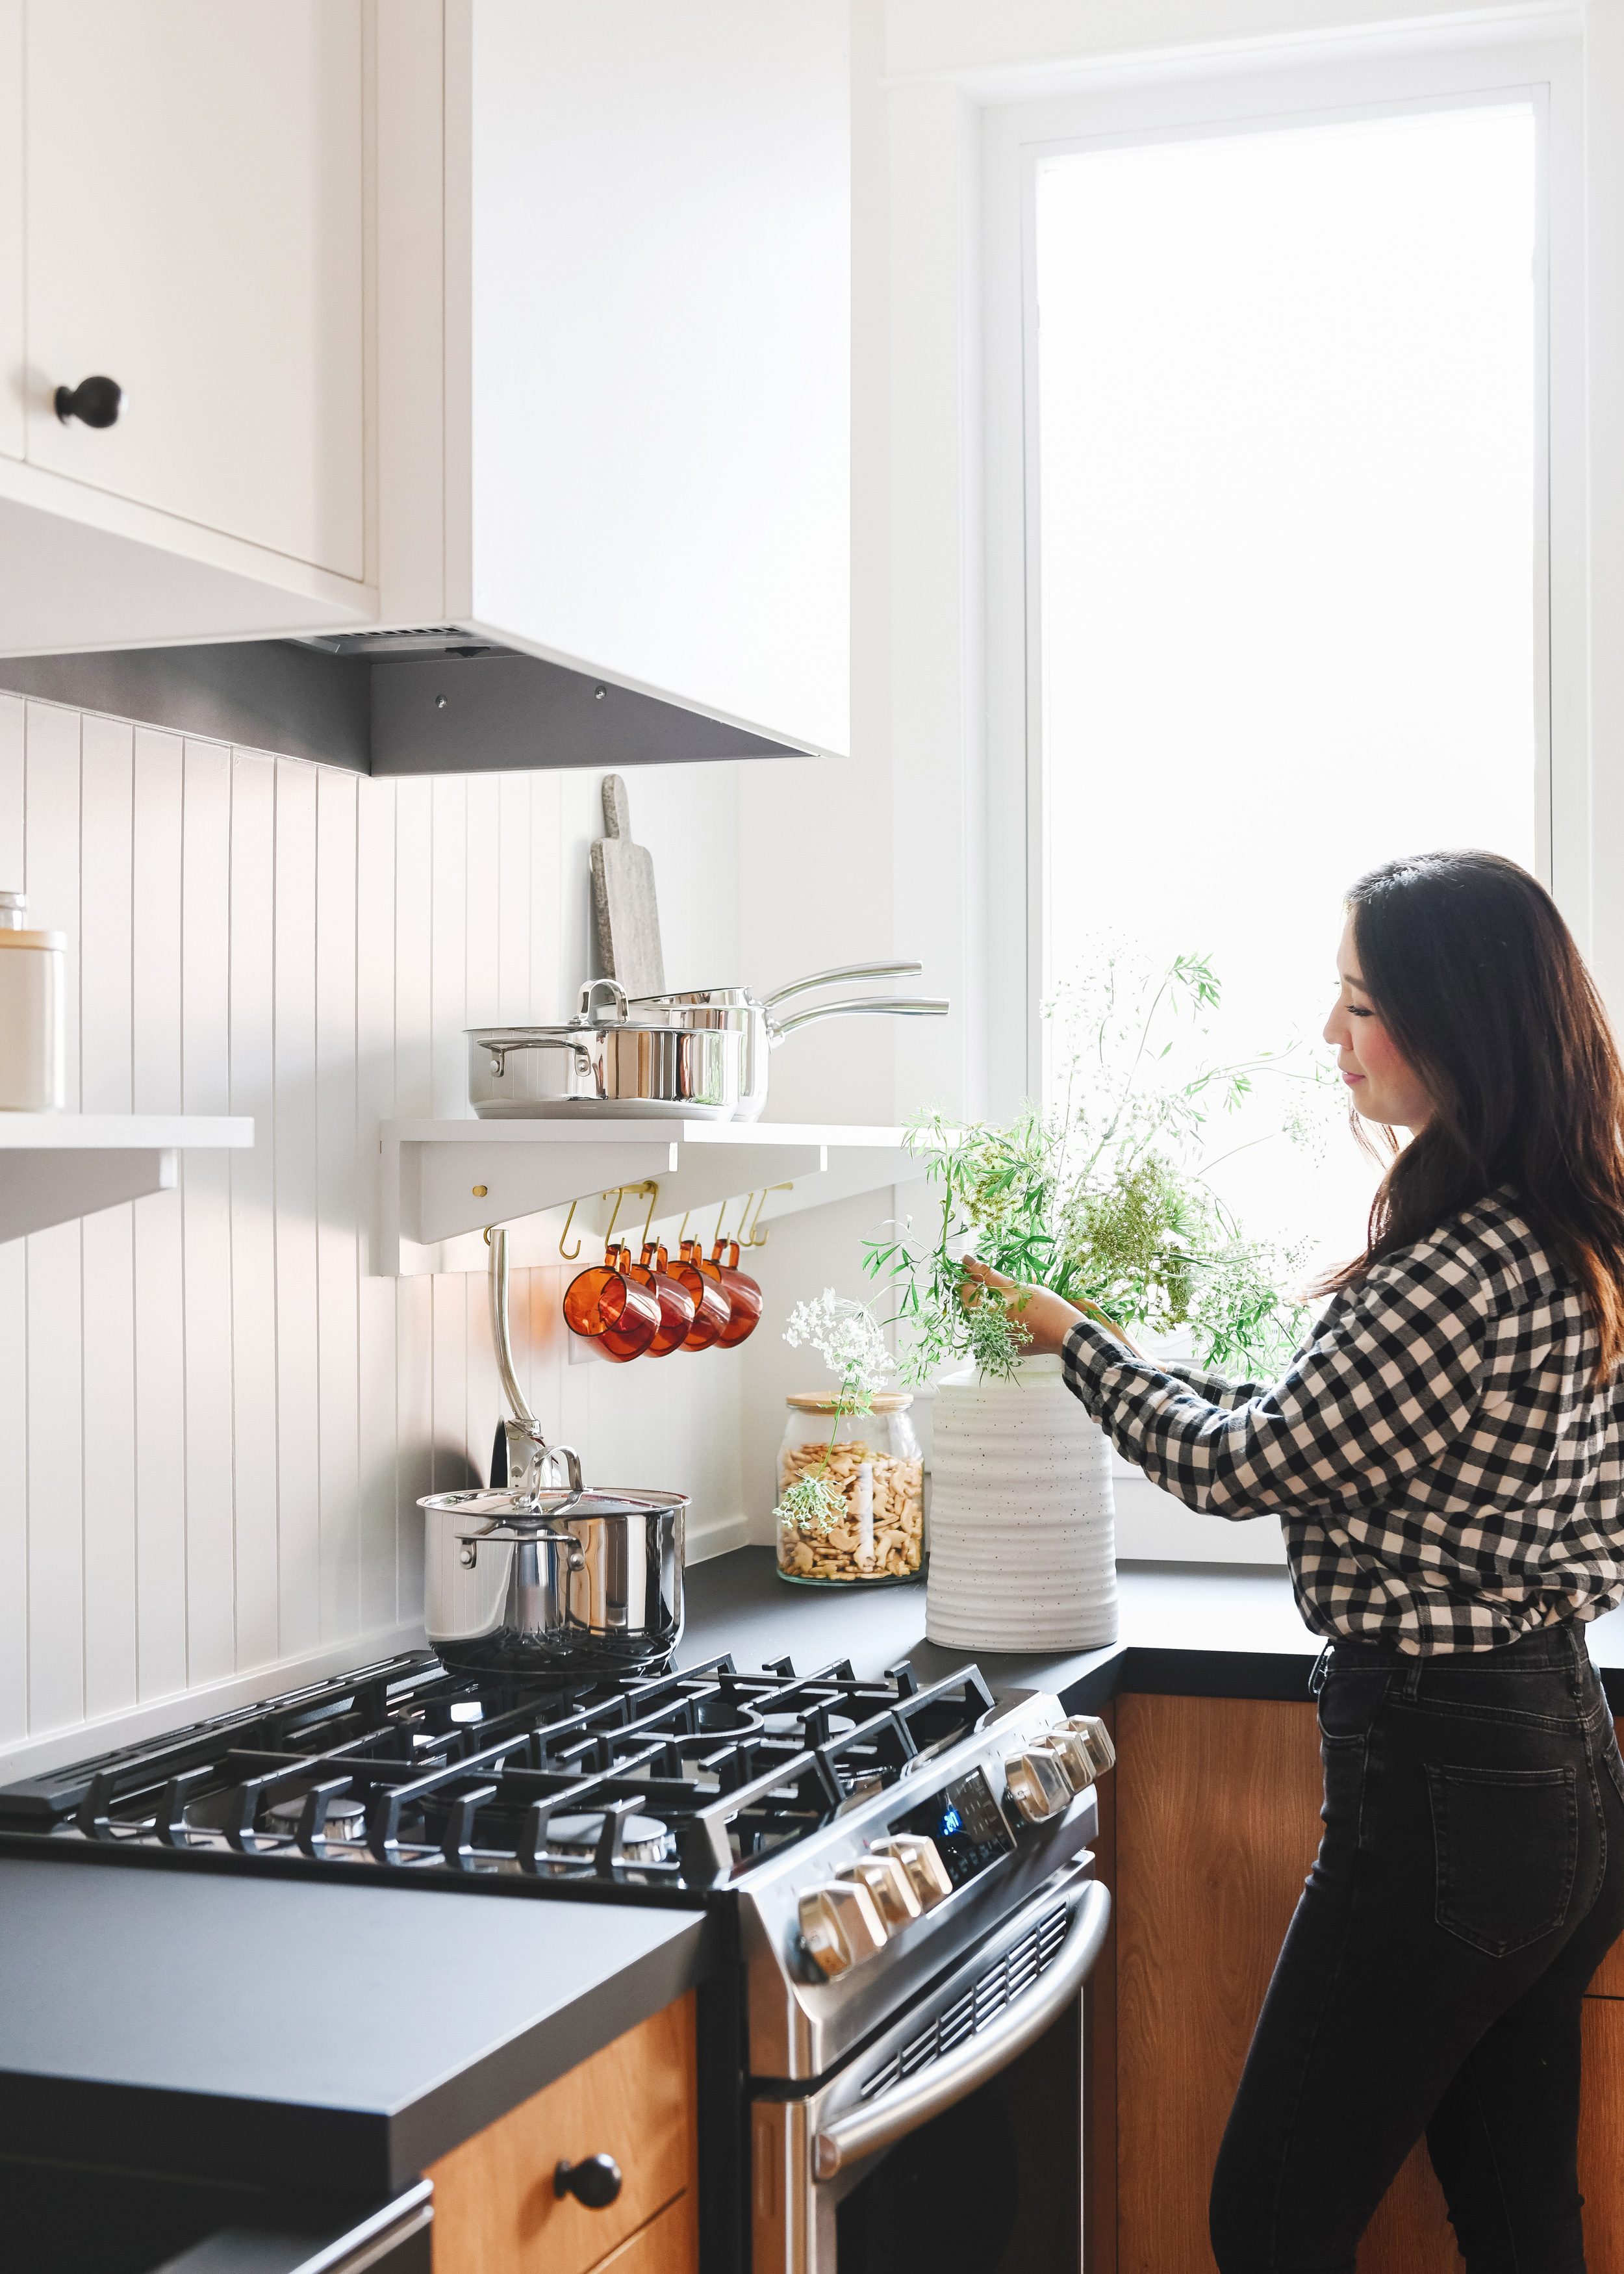 Kim putting together a vase of stems in a white, wood and black kitchen | via Yellow Brick Home